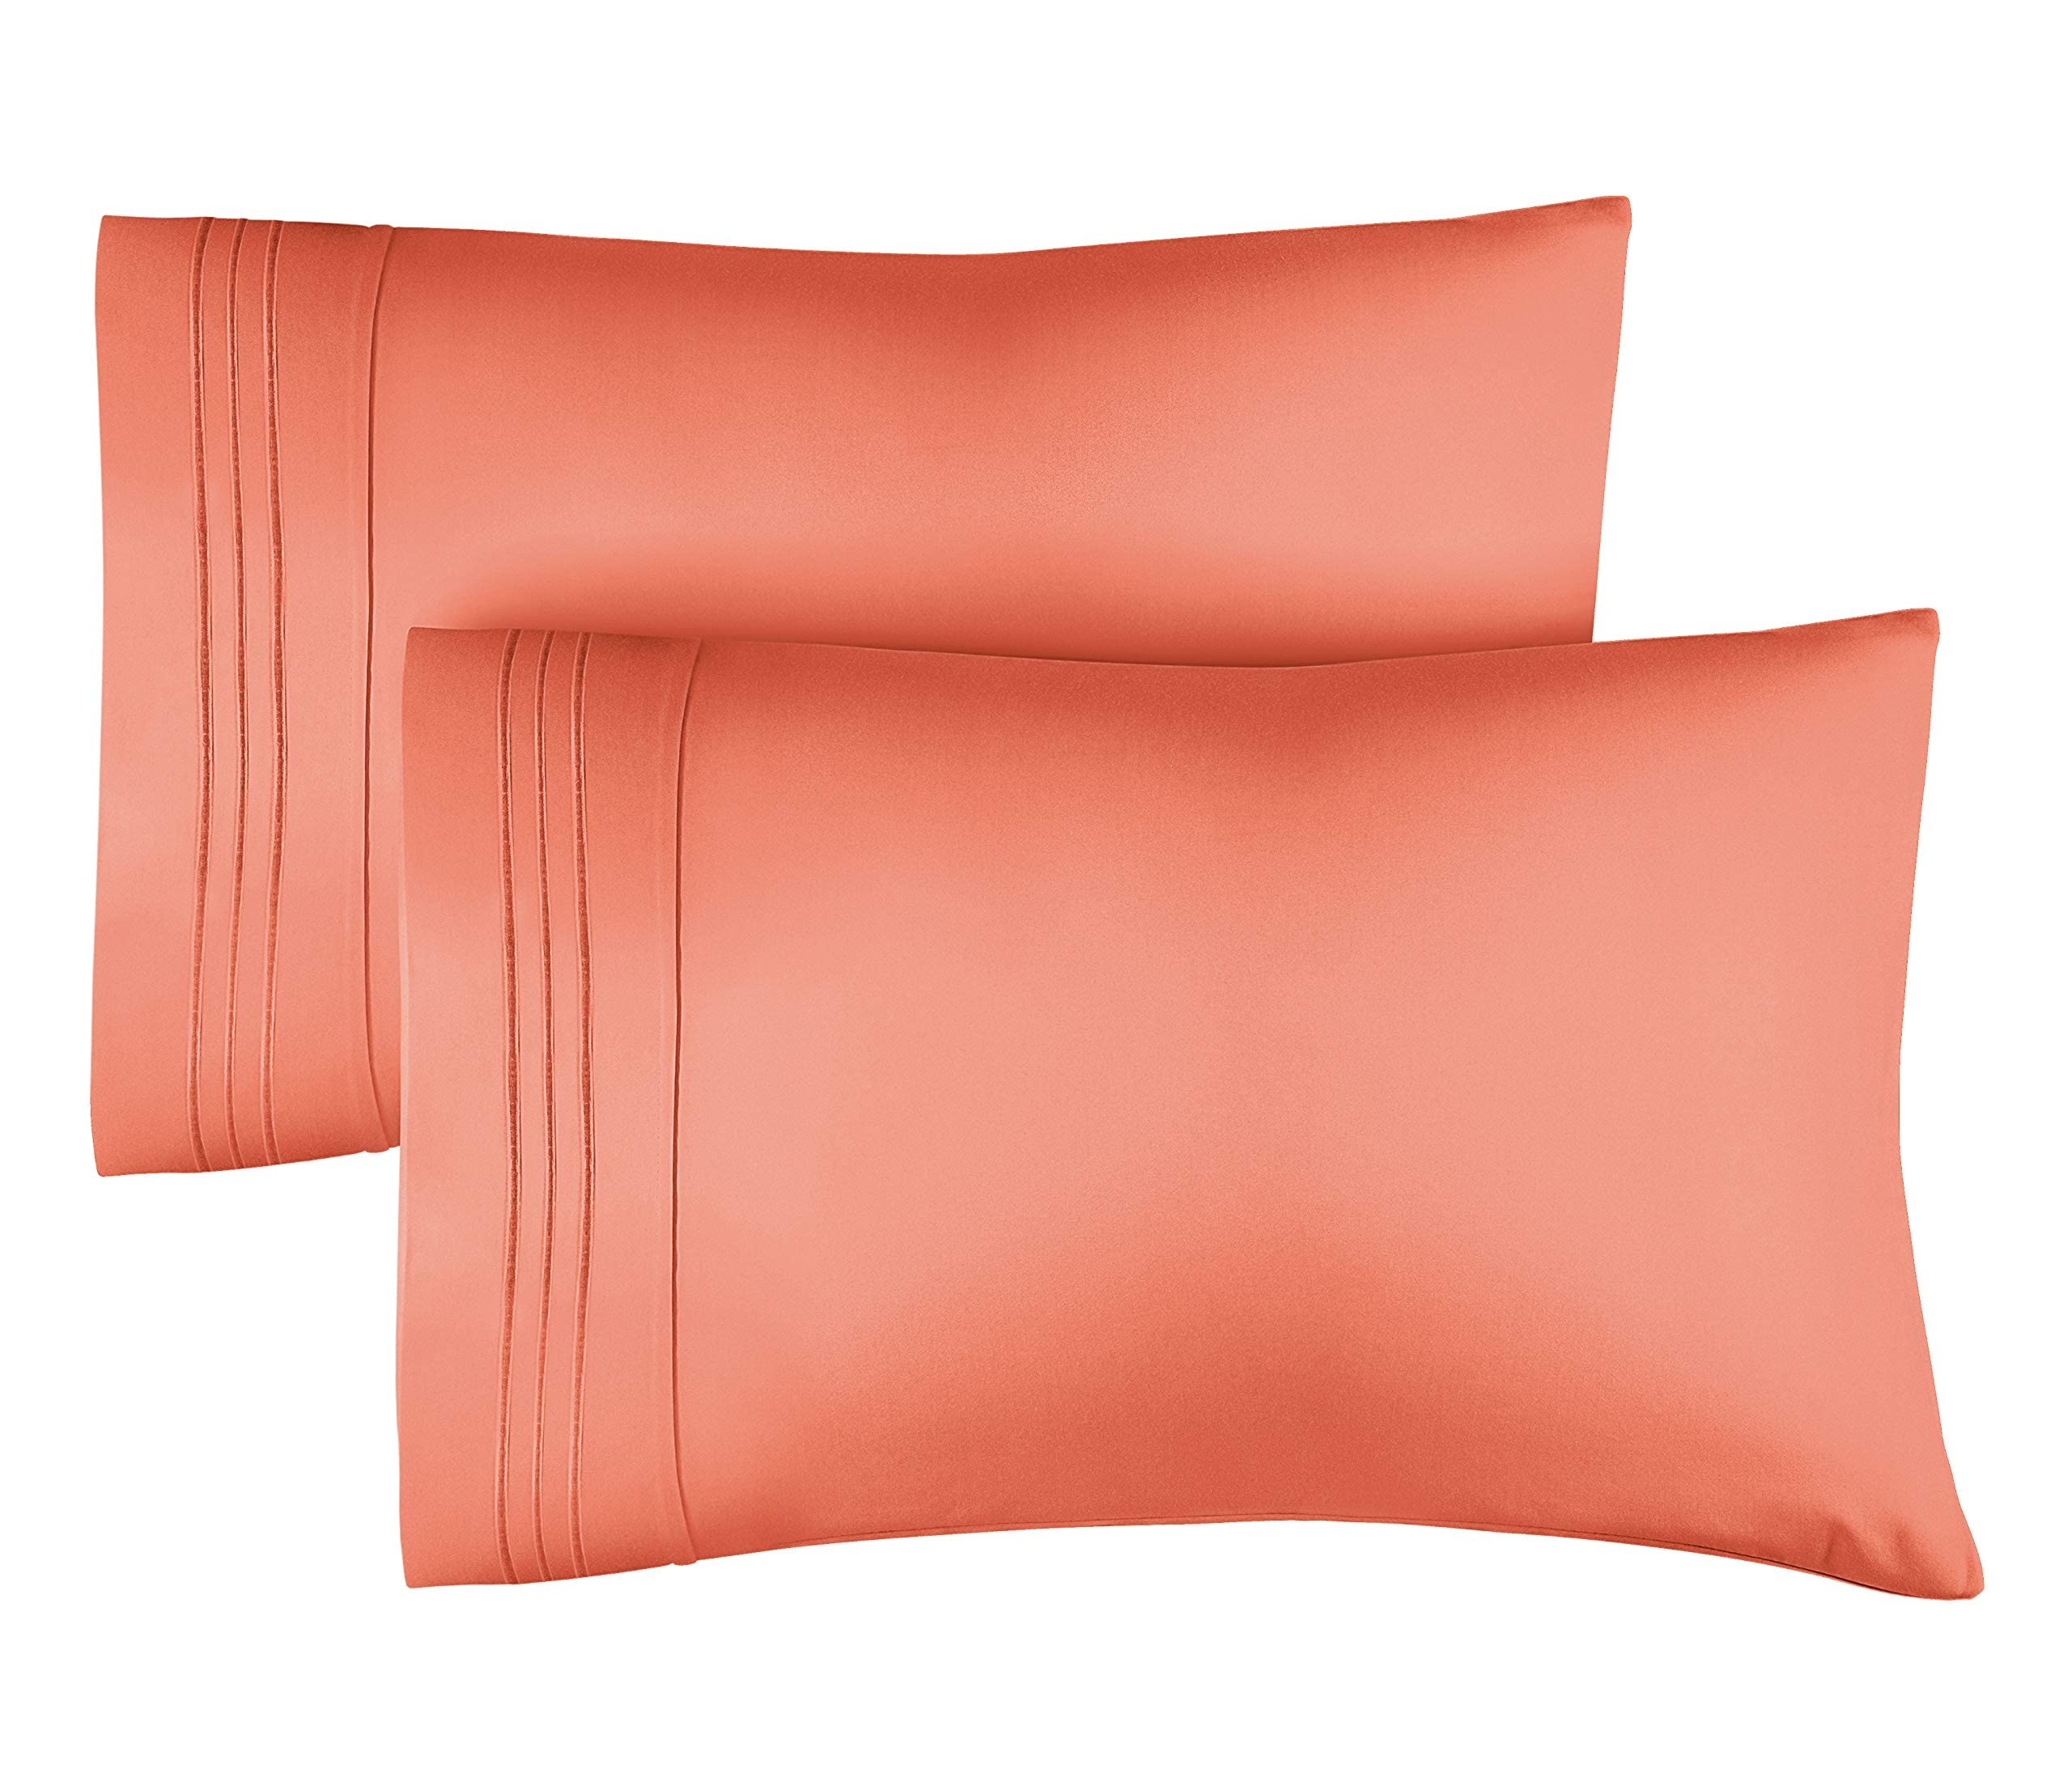 Book Cover King Size Pillow Cases Set of 2 – Soft, Premium Quality Pillowcase Covers – Machine Washable Protectors – 20x40, 20x36 & 20x48 Pillows for Sleeping 2 PC - King Size Pillow Cover Bedding King 14 - Coral